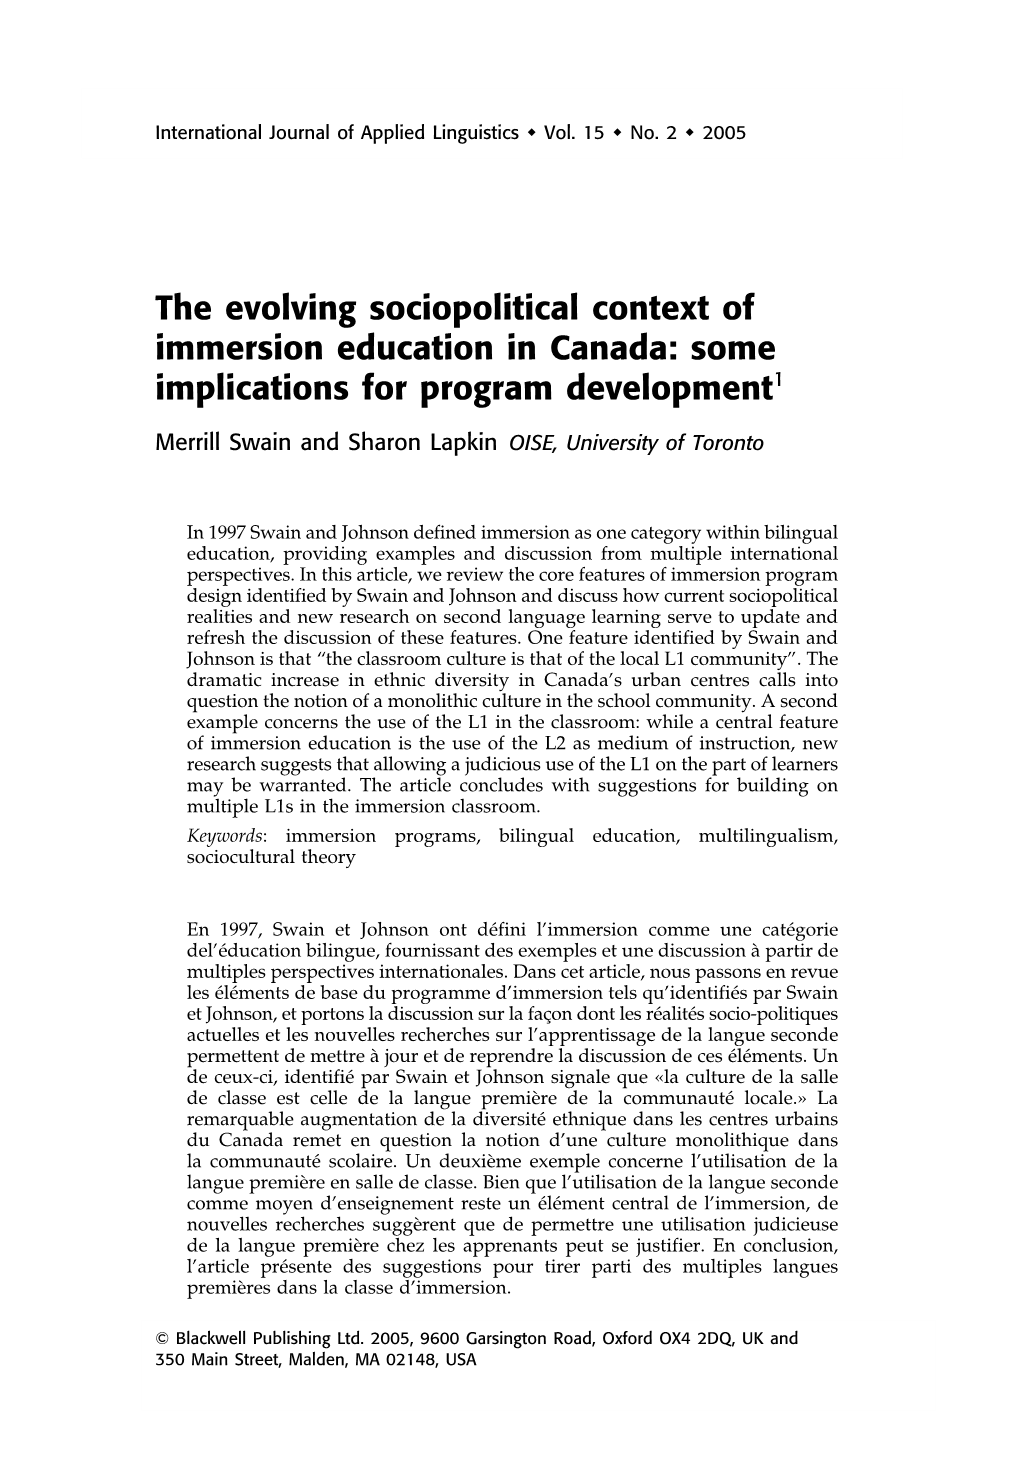 The Evolving Sociopolitical Context of Immersion Education in Canada: Some Implications for Program Development1